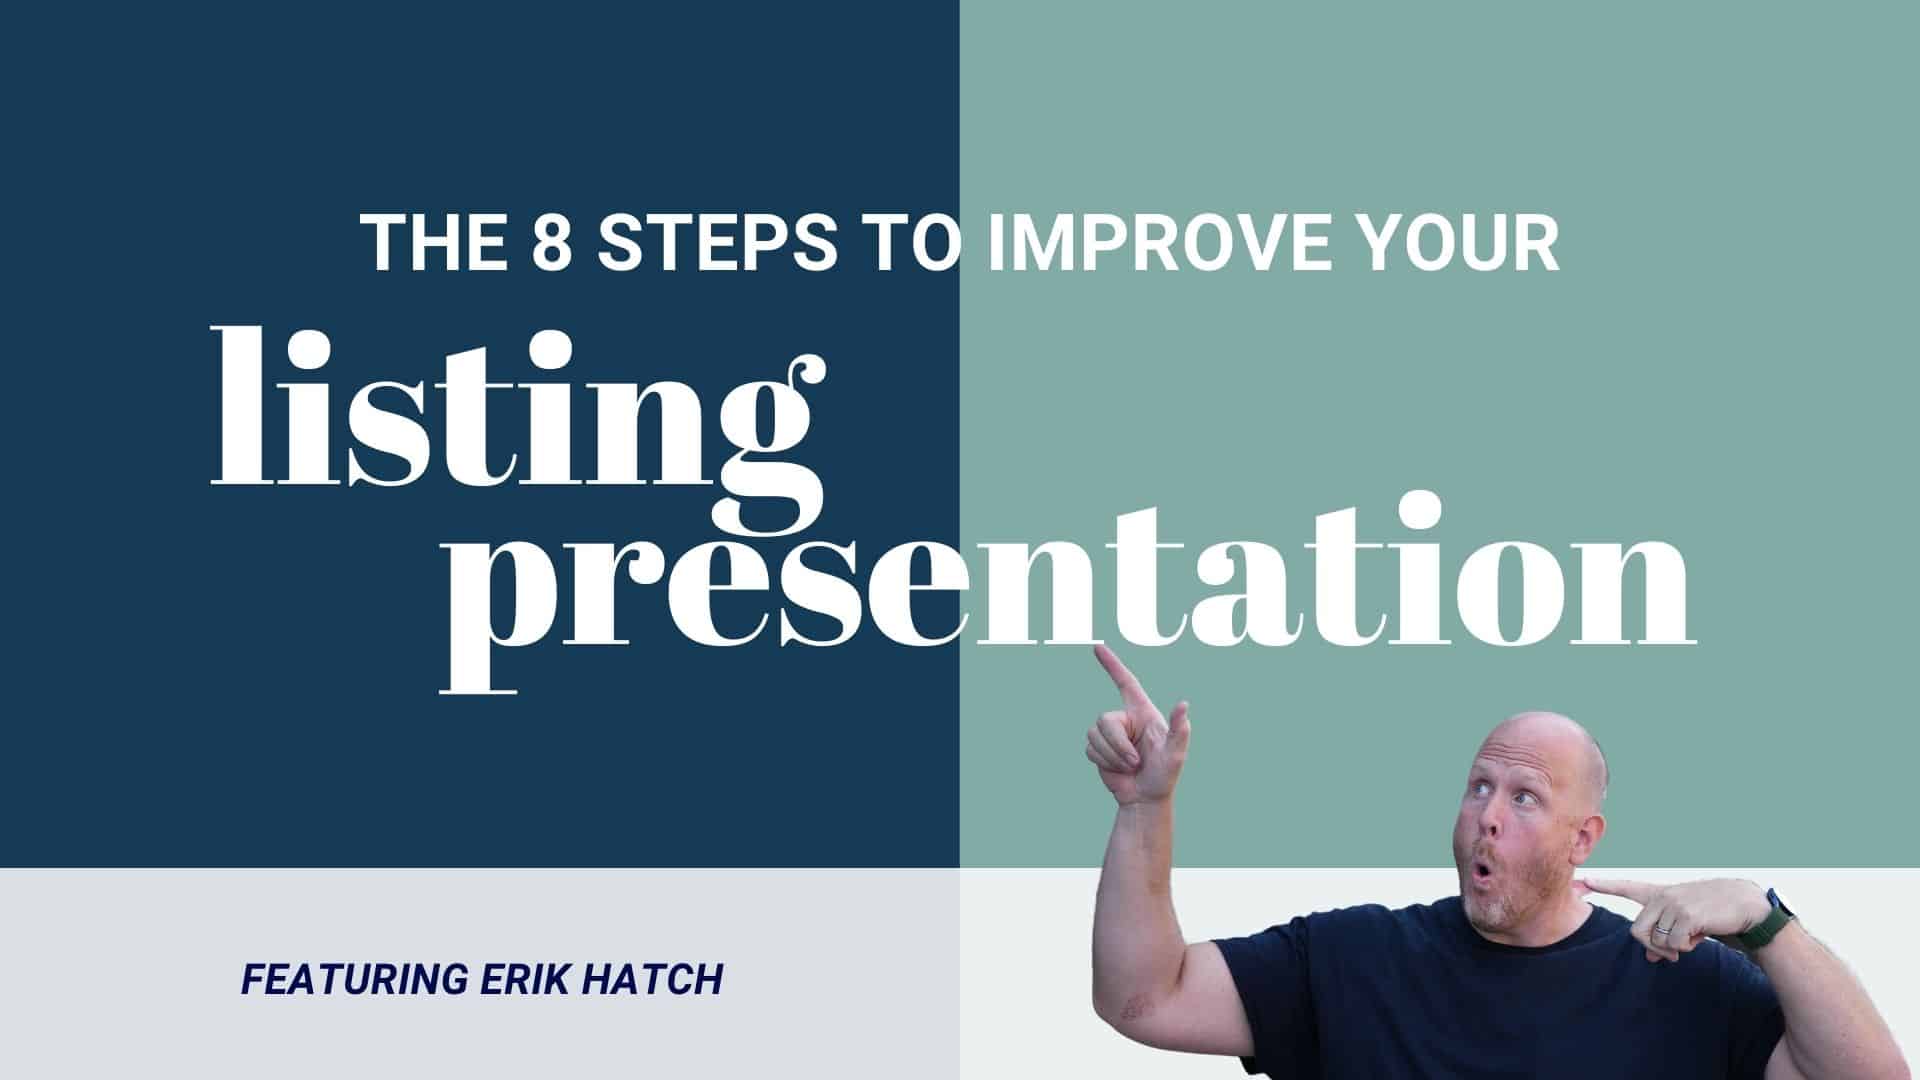 The 8 Steps to Improve Your Listing Presentation